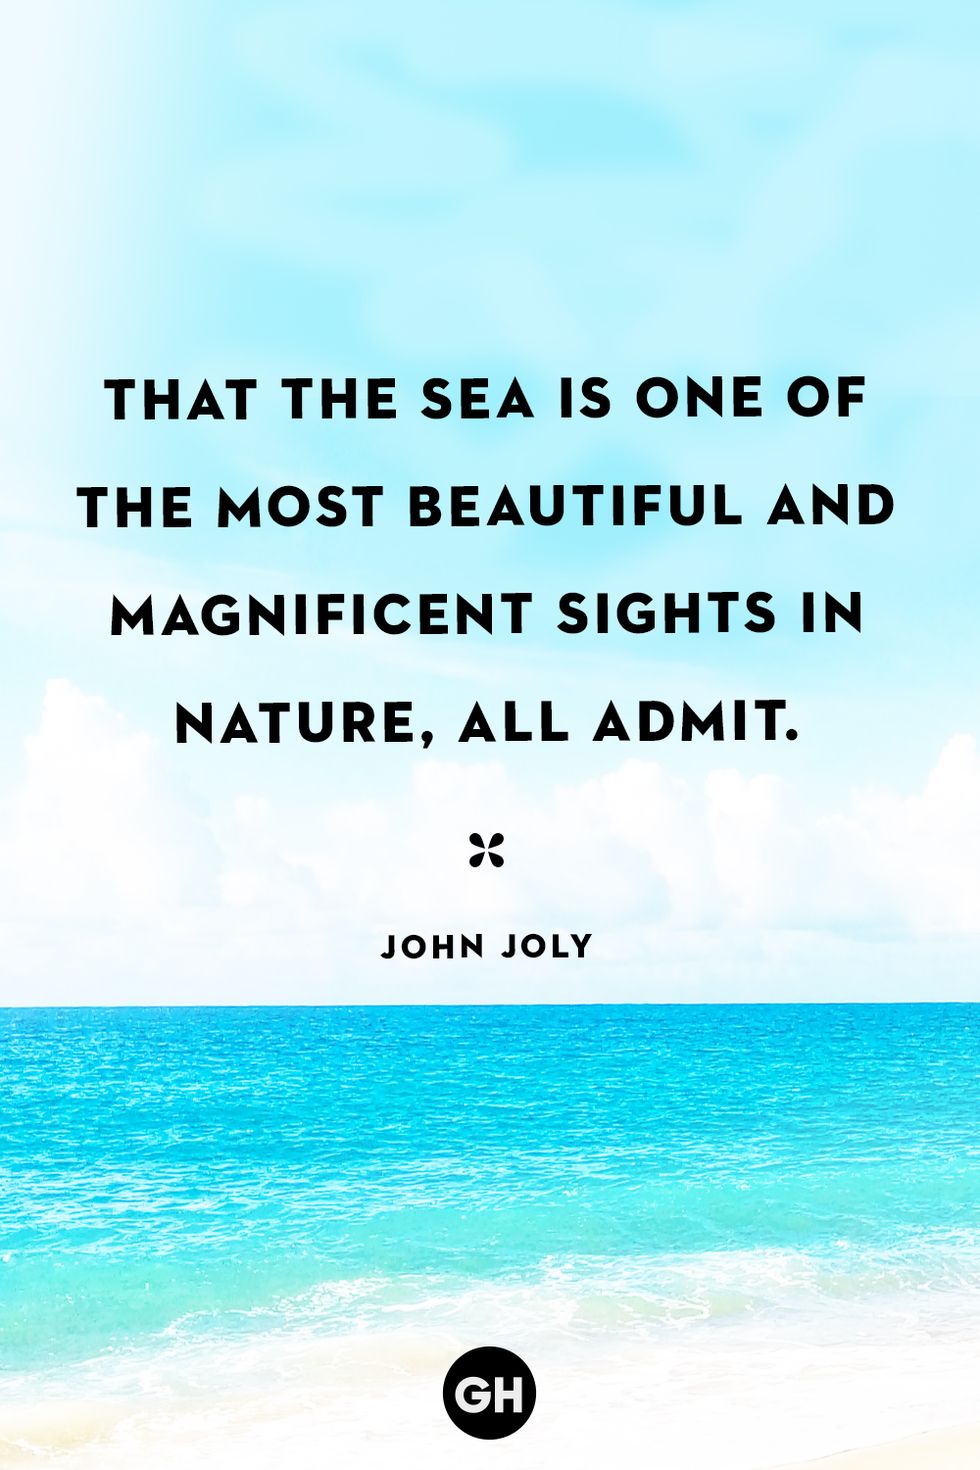 The best beach quotes of all time